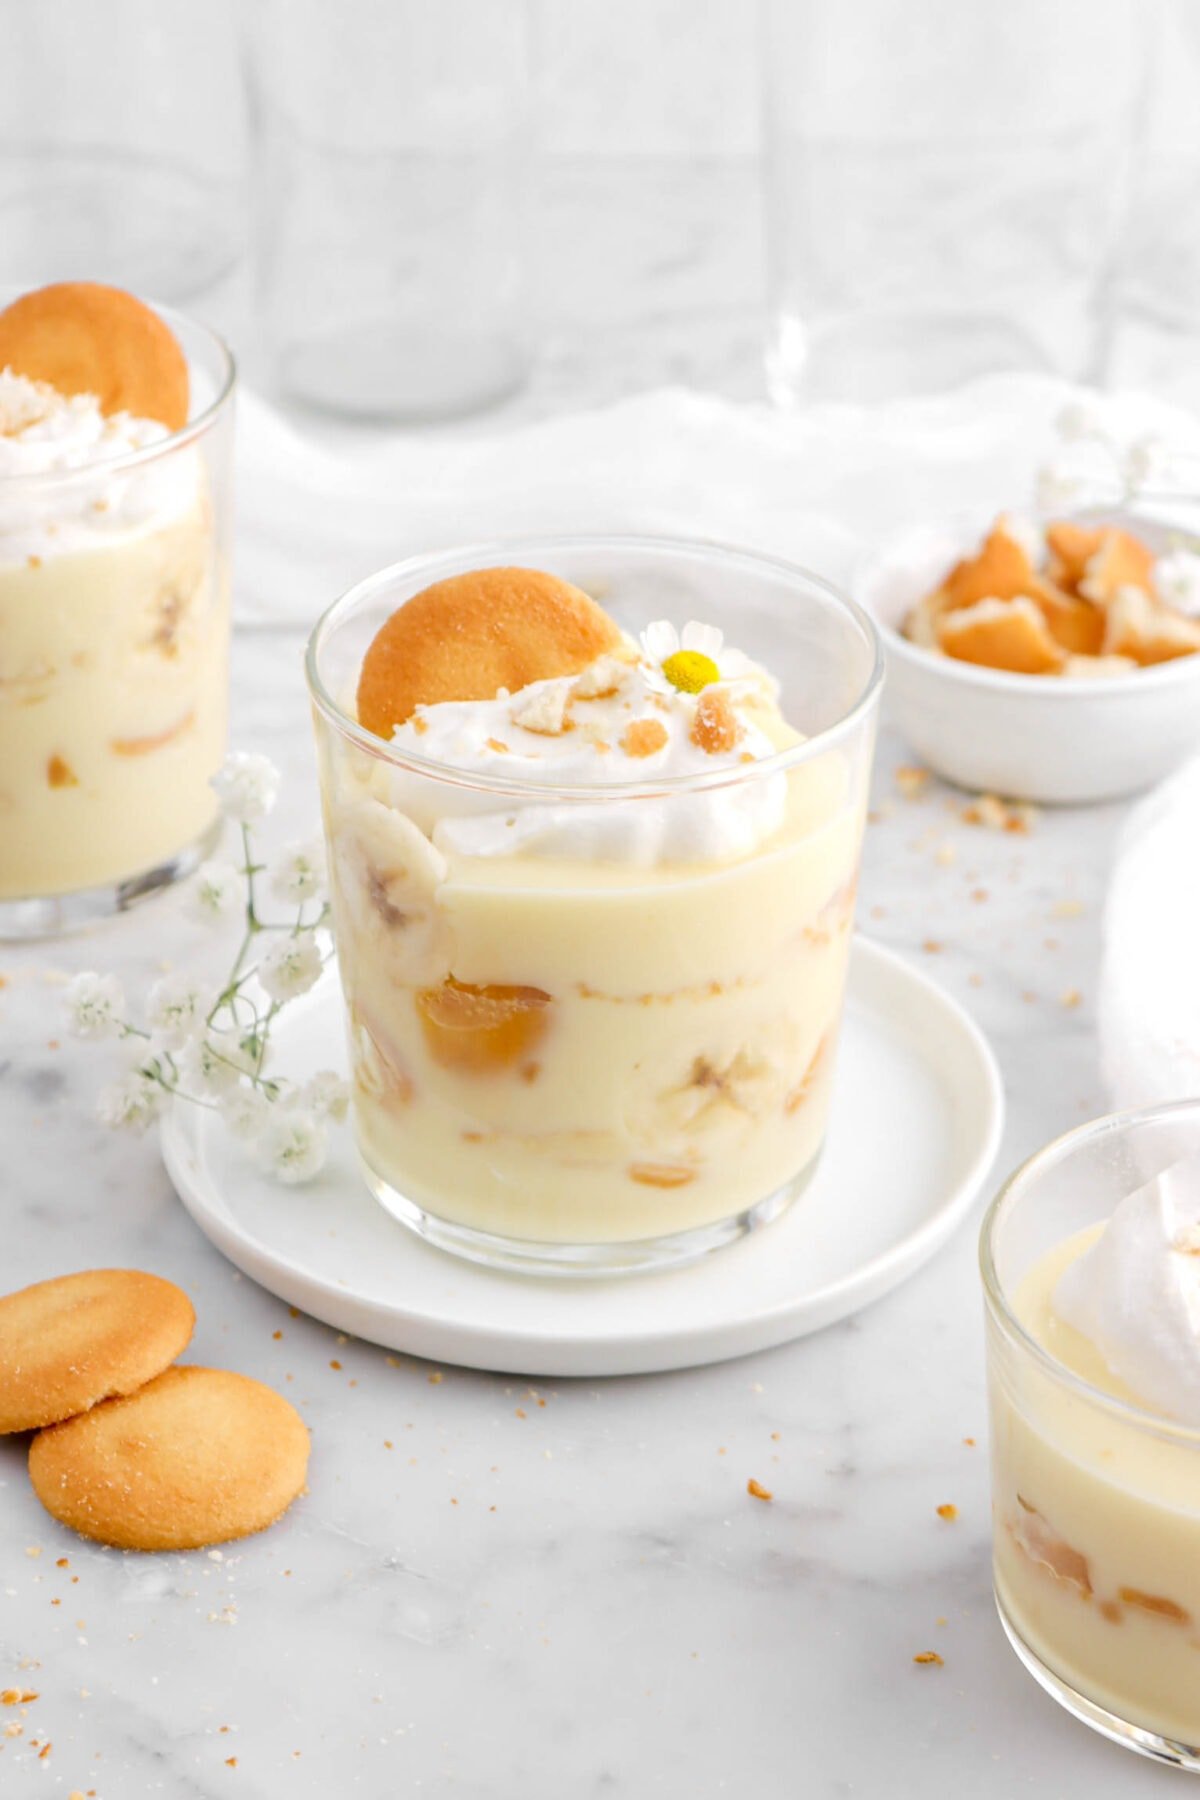 angled close up of banana pudding in glass on a white plate.